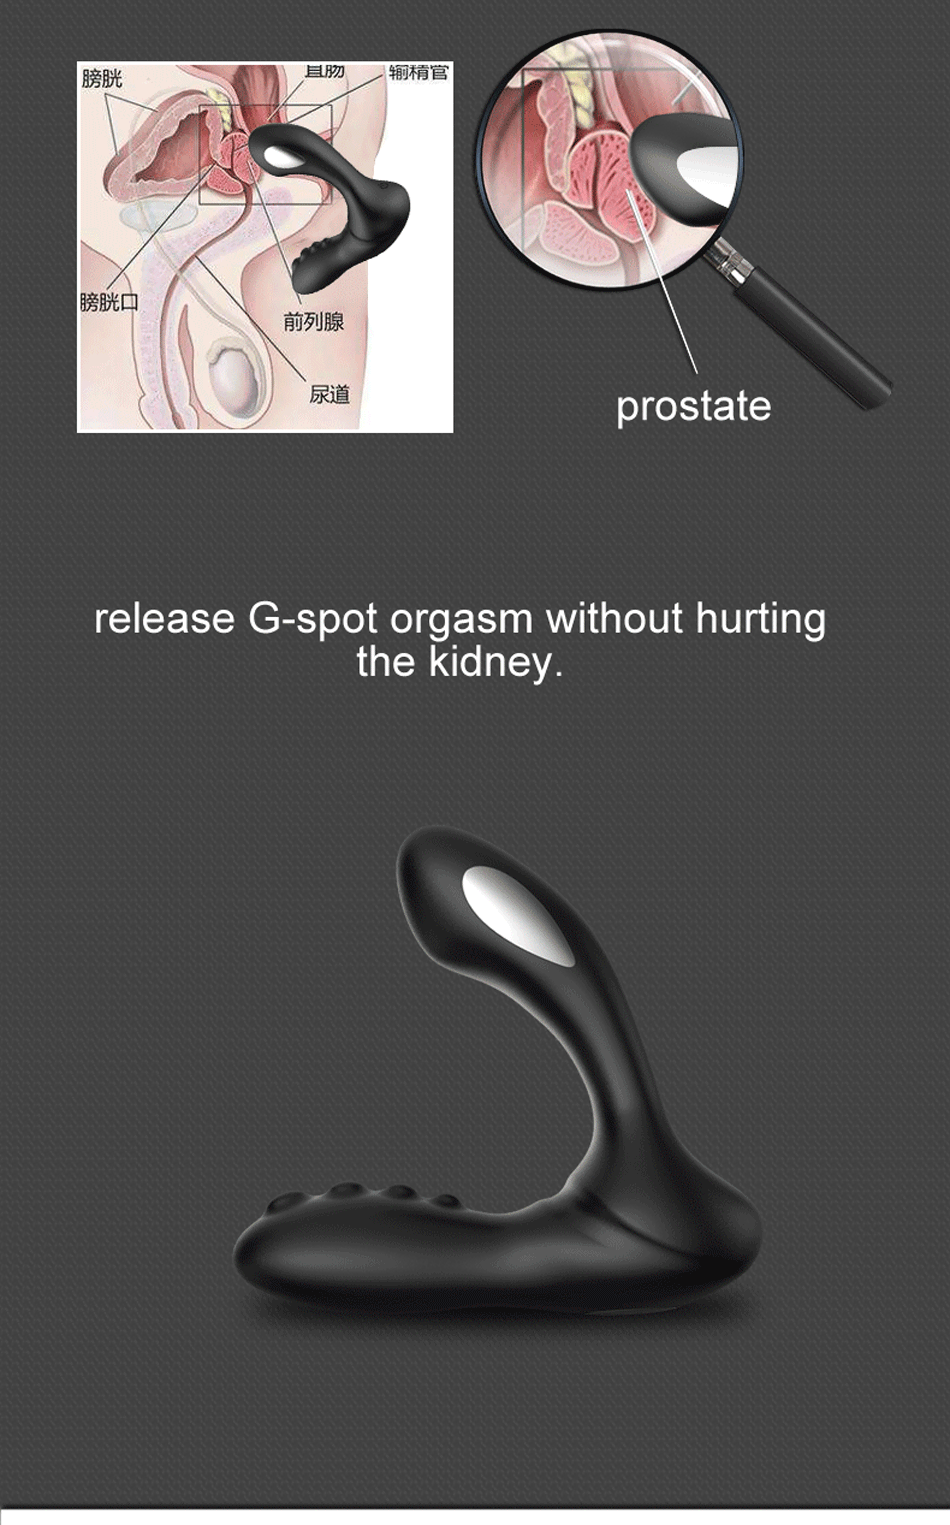 Electric Shock Prostate Massager Sex Toys